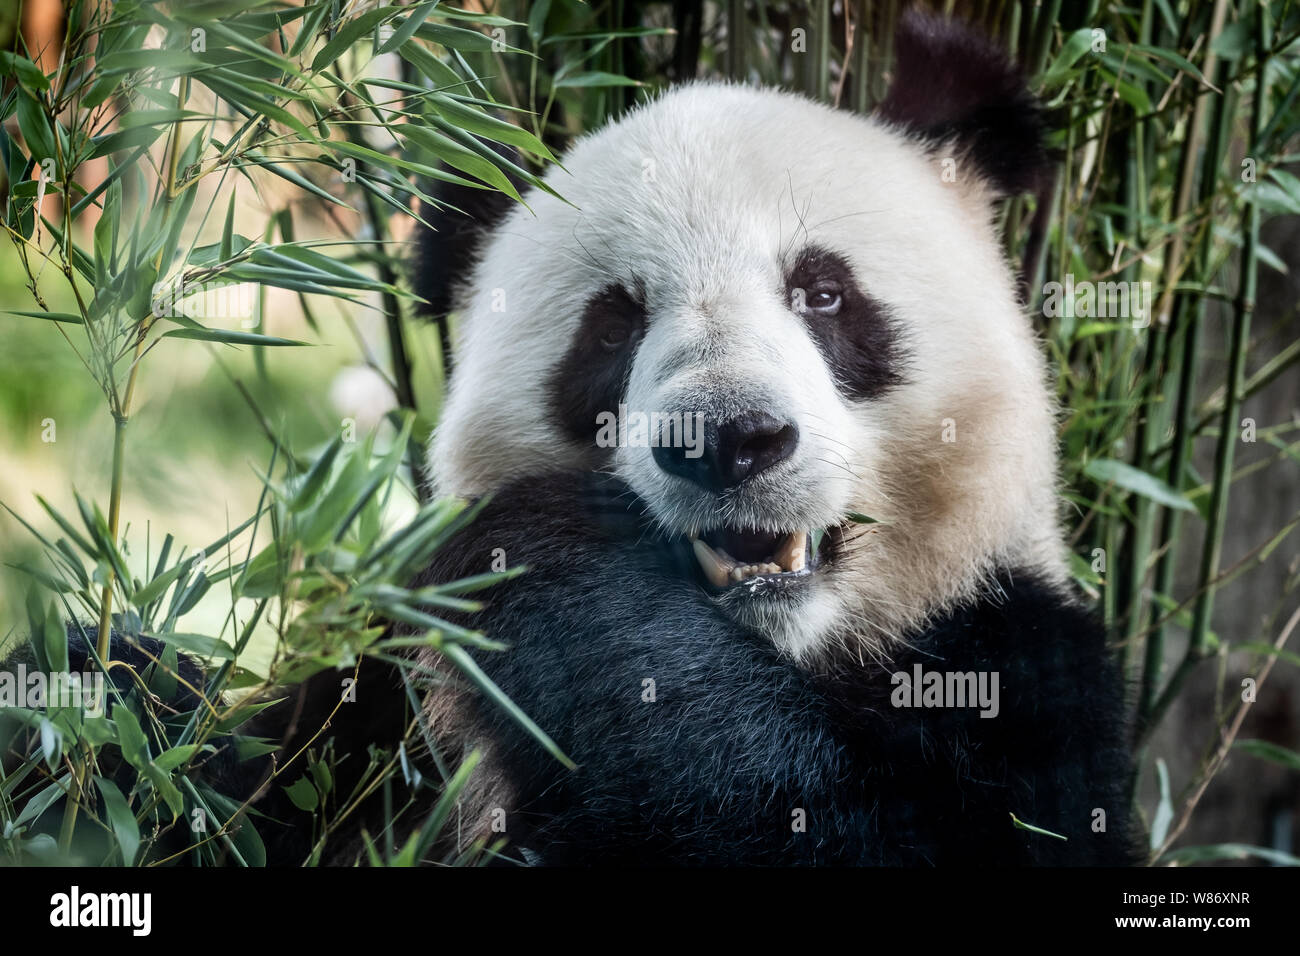 The two new pandas, Mao Sun and Xing Er (pictured) , seen in Copenhagen Zoo. (Photo credit: Gonzales Photo - Kim M. Leland). Stock Photo